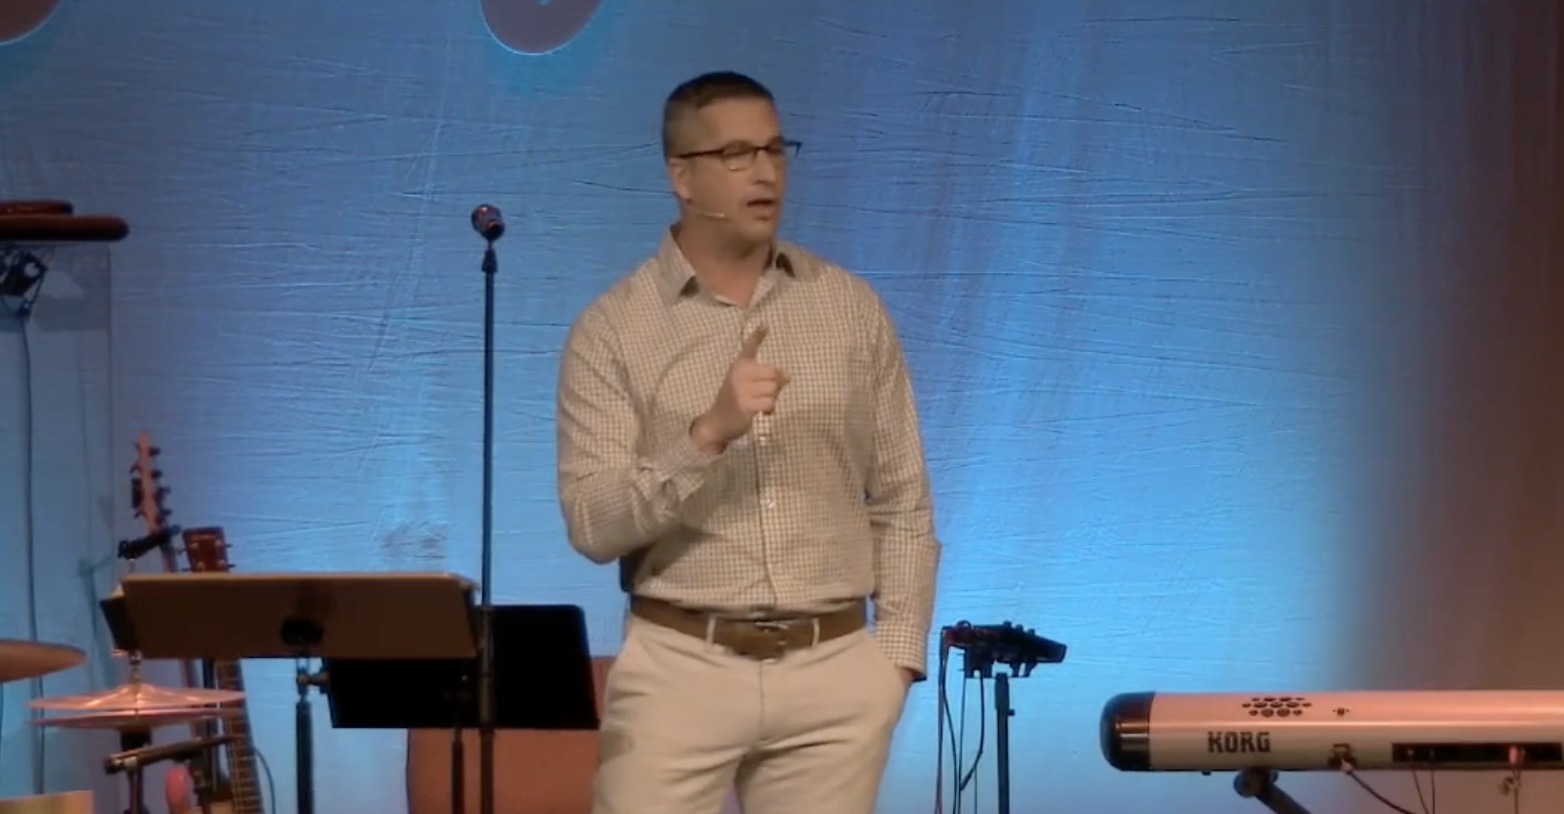 Megachurch pastor says a great threat to Christians is secret sinning: 'Don’t hide it’